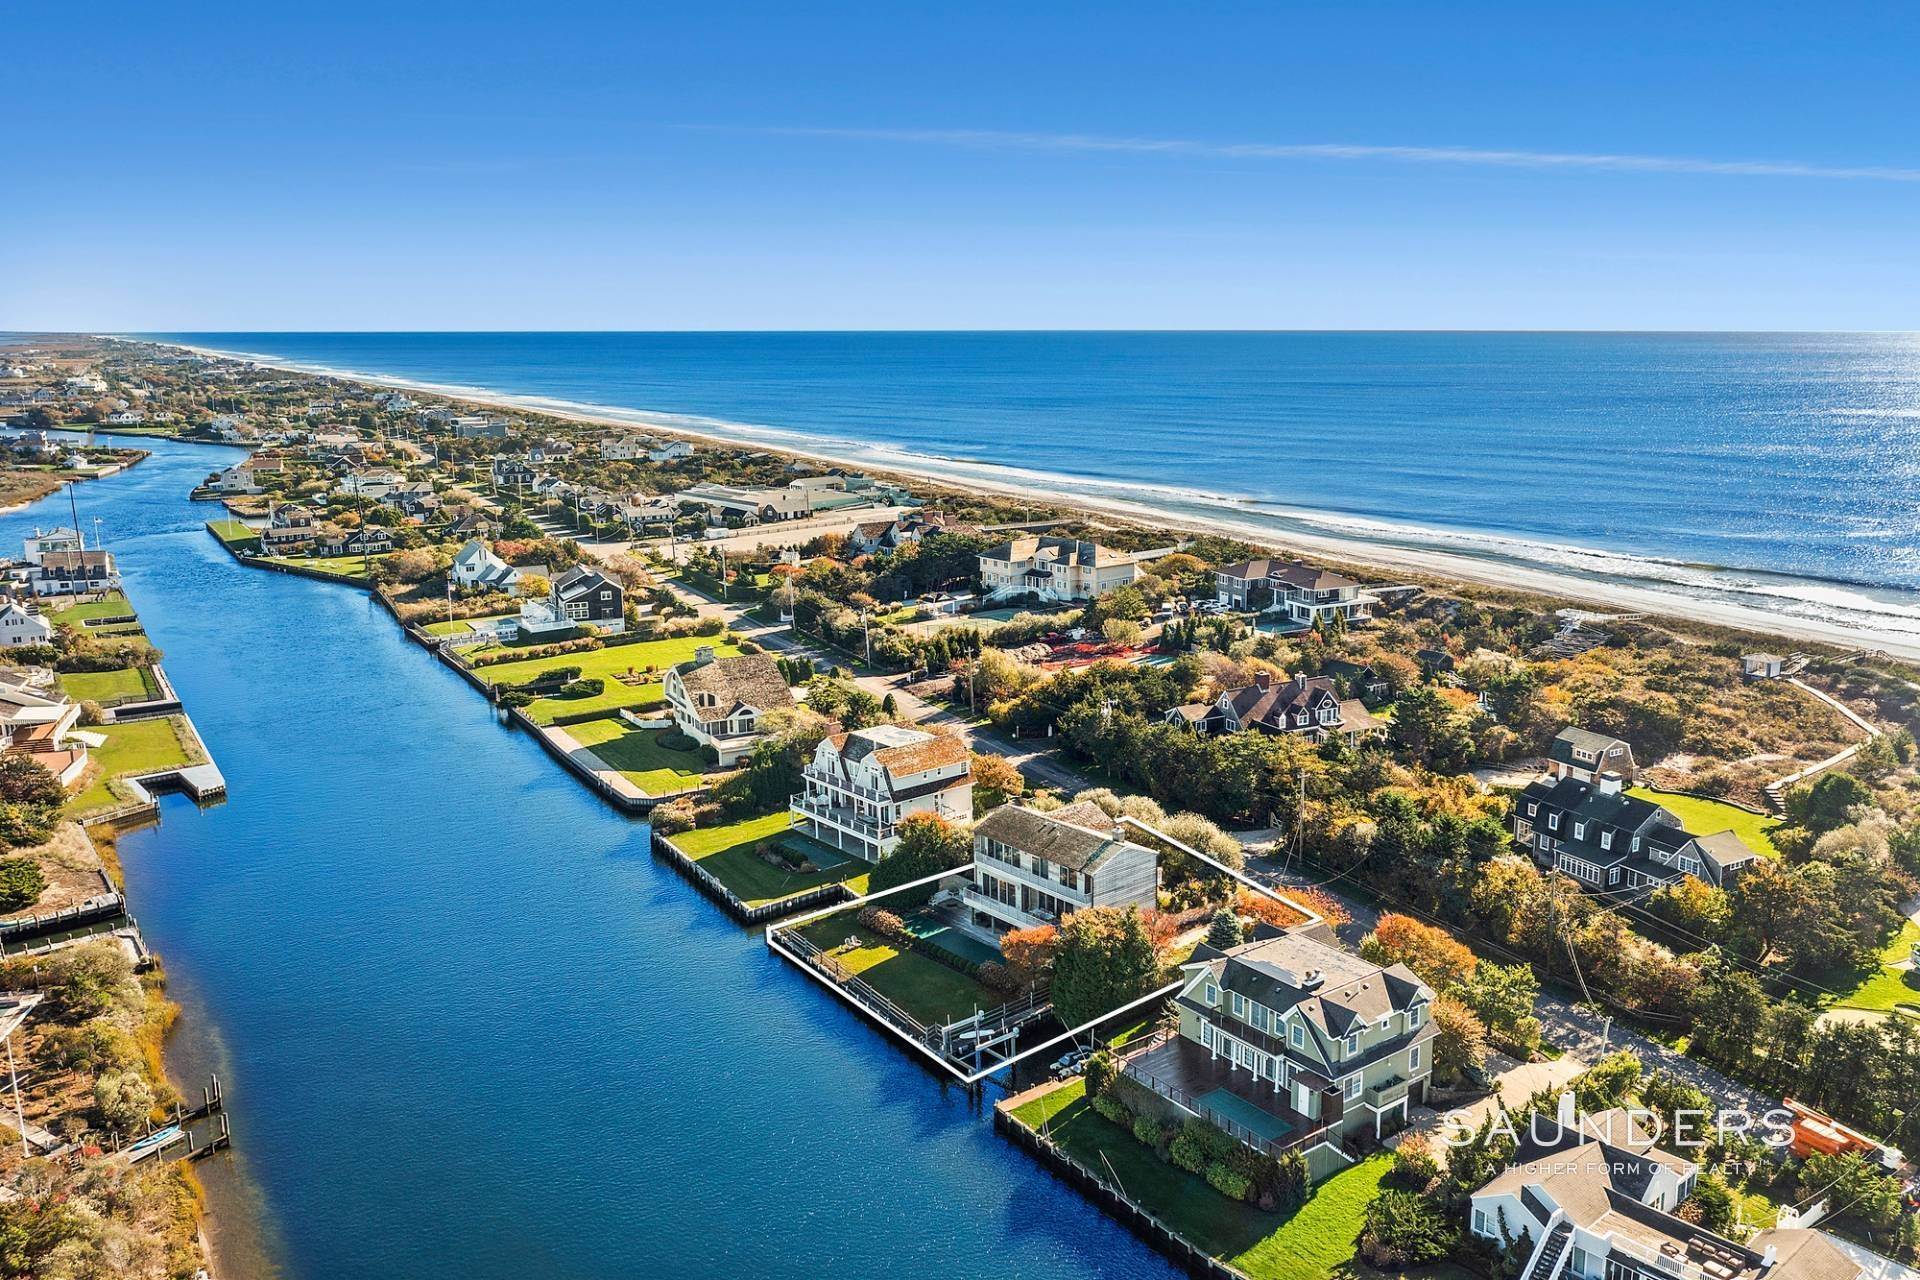 2. Single Family Homes for Sale at Dune Road Canalfront With 50' Lap Pool, Boat Slip & Ocean Access 43 Dune Road, Quogue, NY 11959